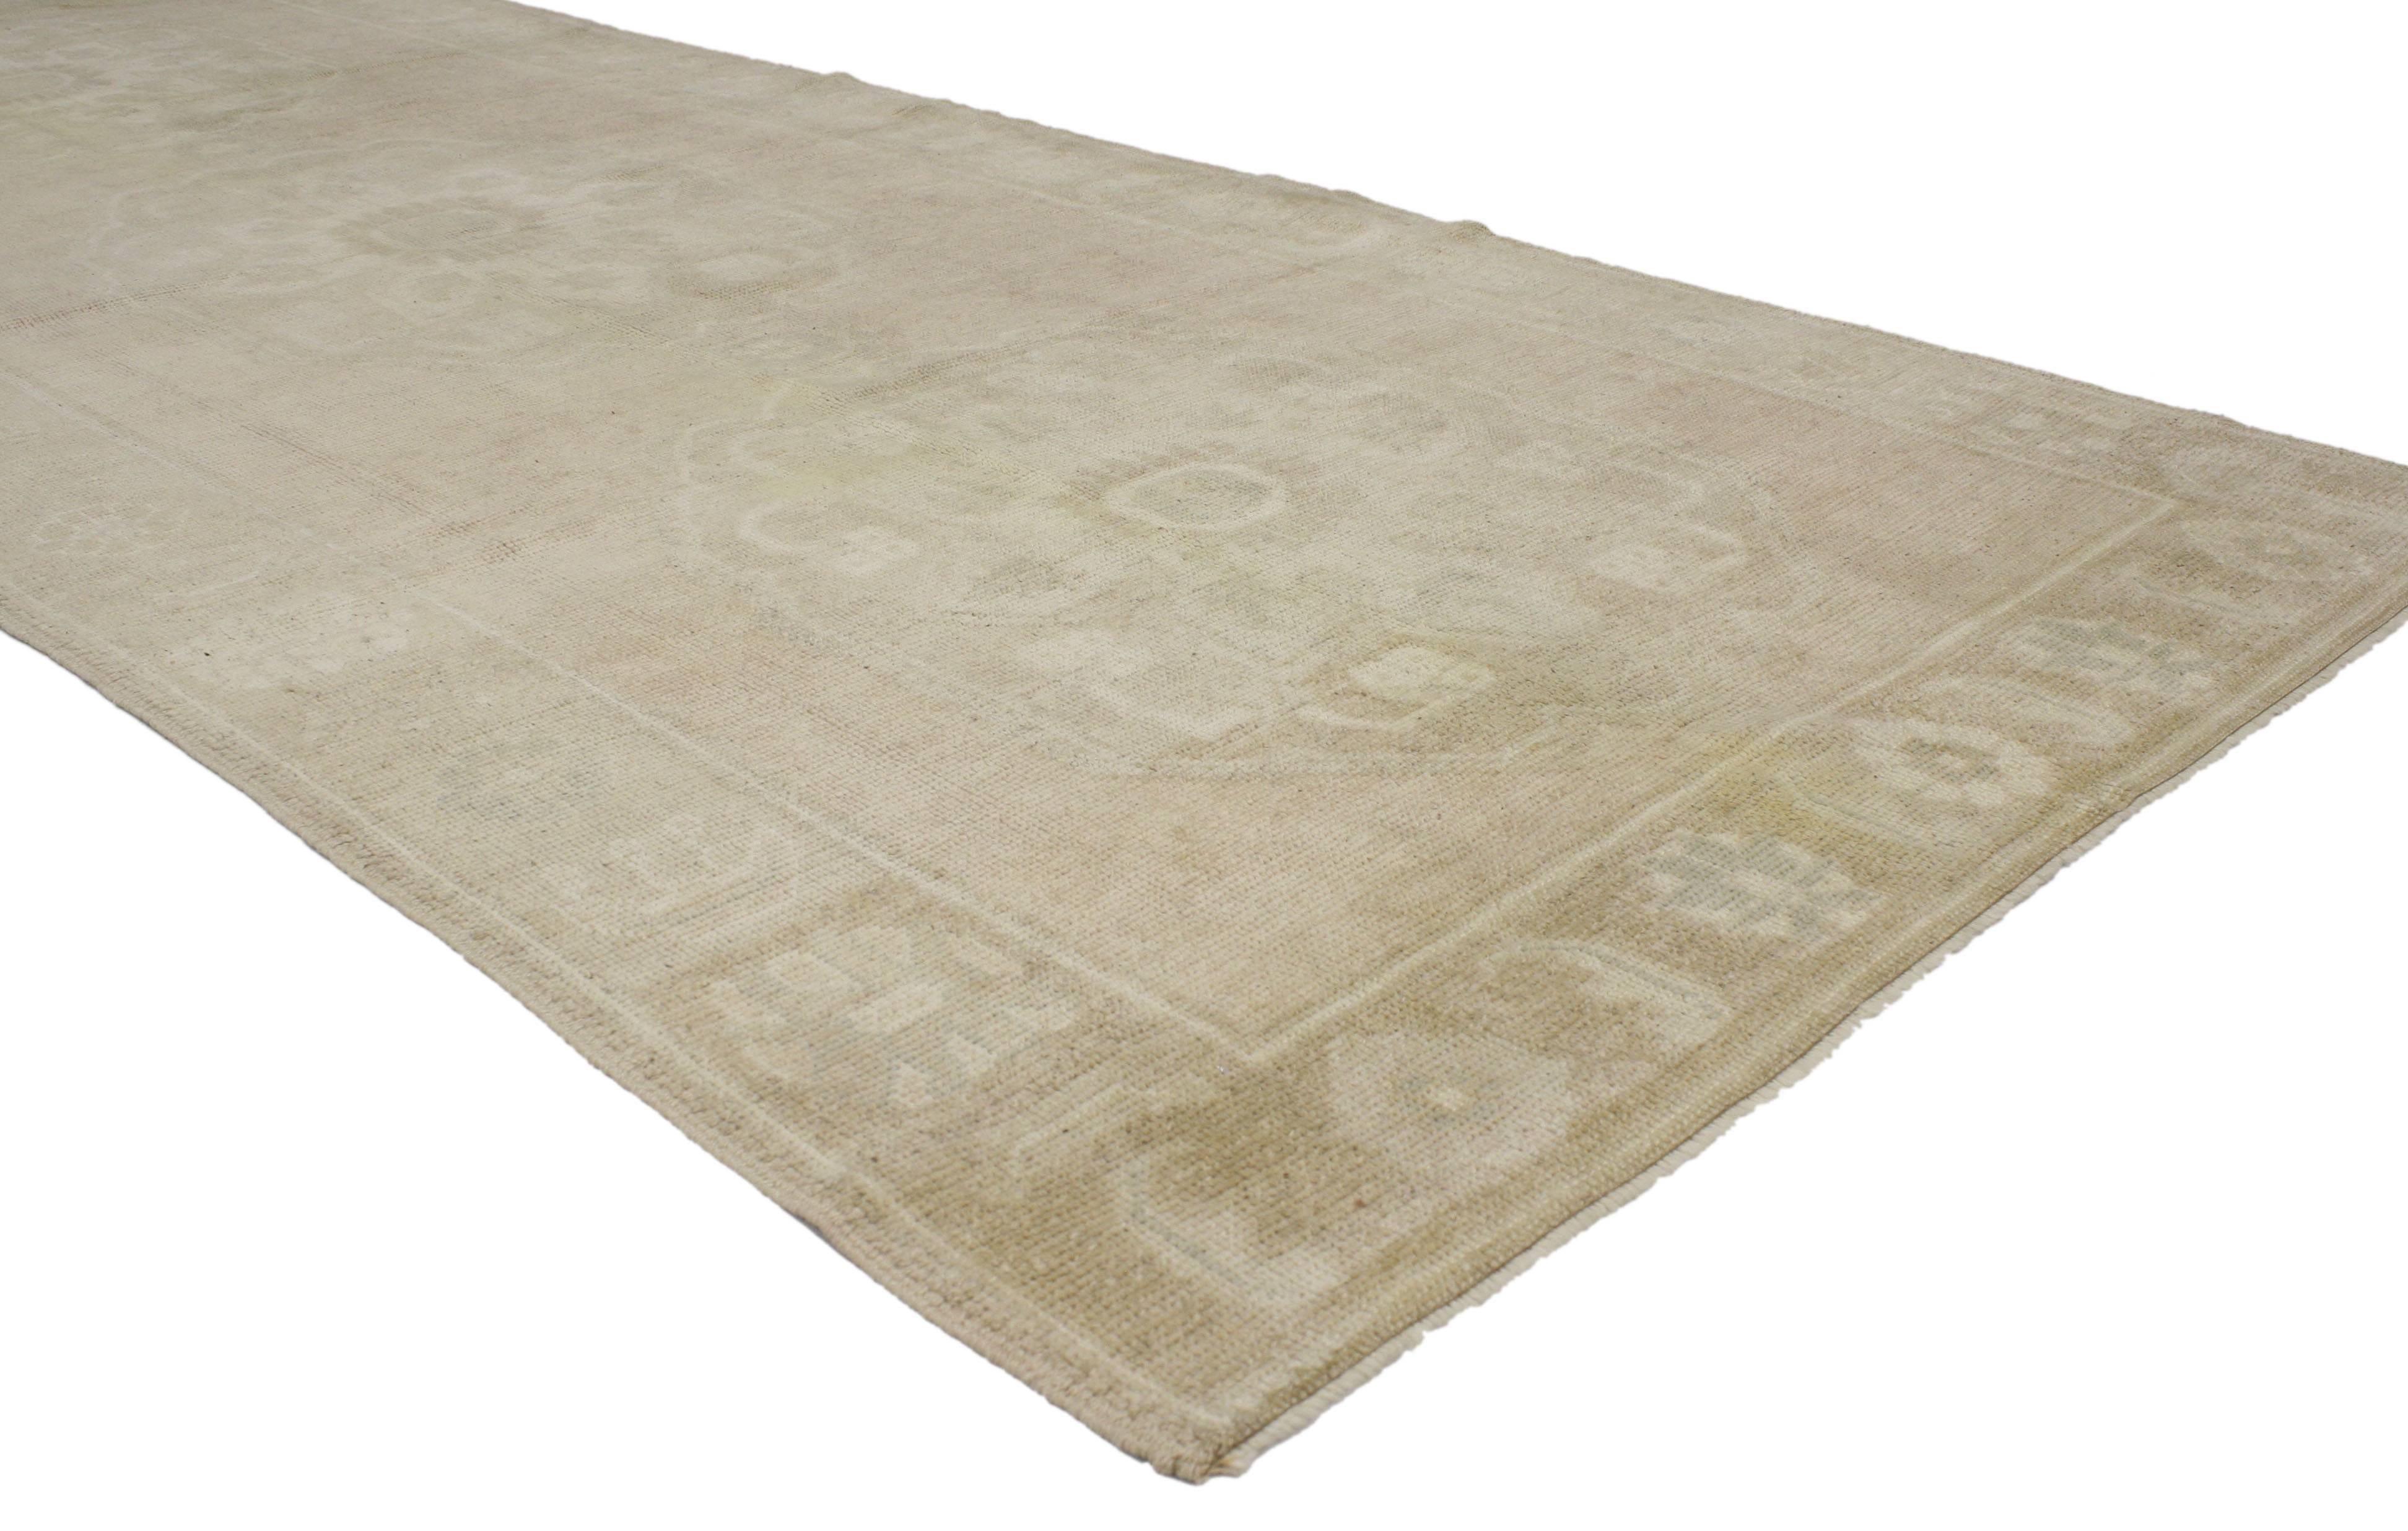 This vintage Turkish Oushak runner comes in muted colors and a casual elegant style. Immersed in Anatolian history, this vintage Oushak carpet runner features three inconspicuous medallions and in an open beige field surrounded by delicate border.